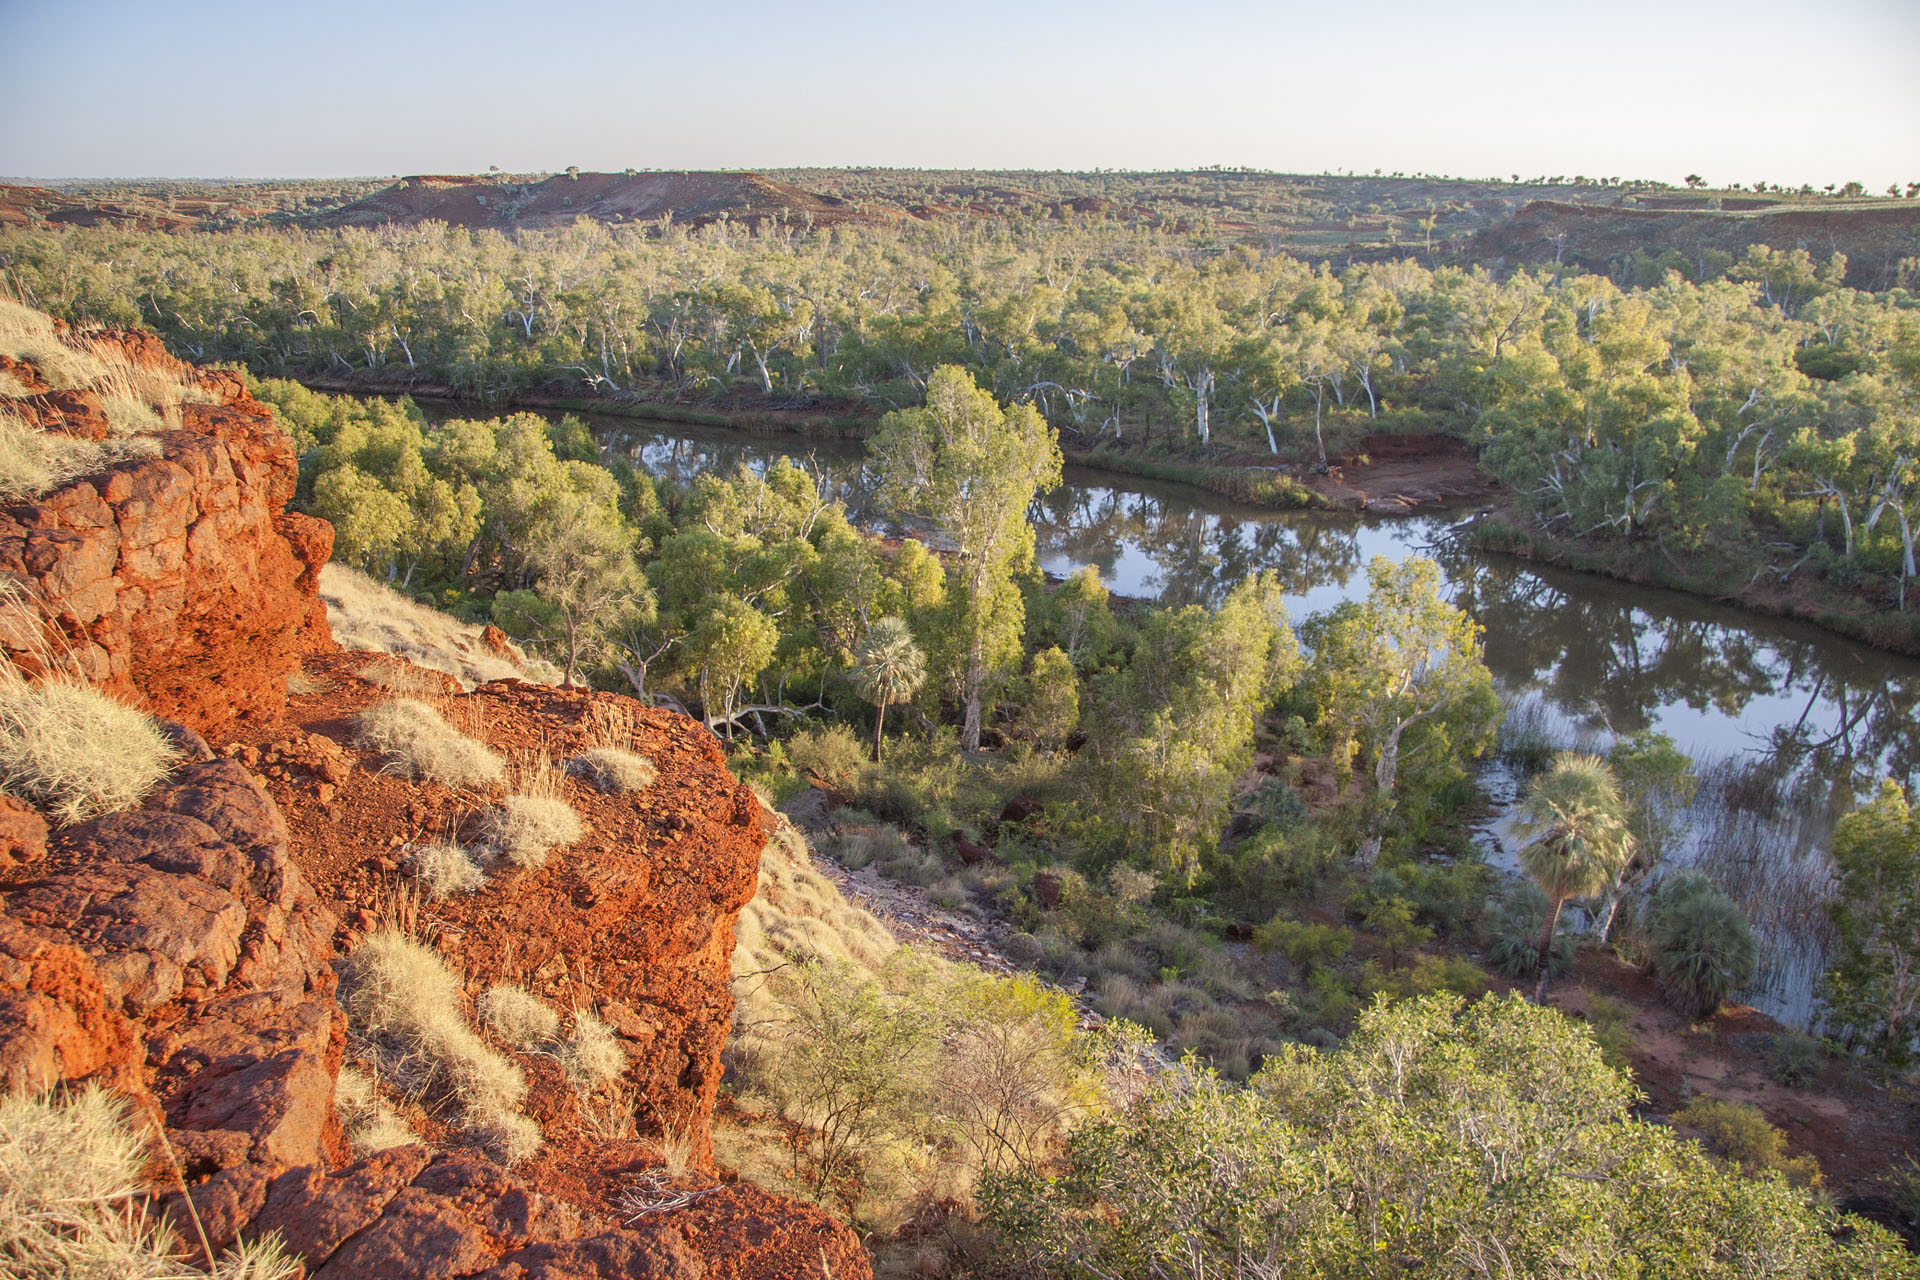 The Fortescue River.